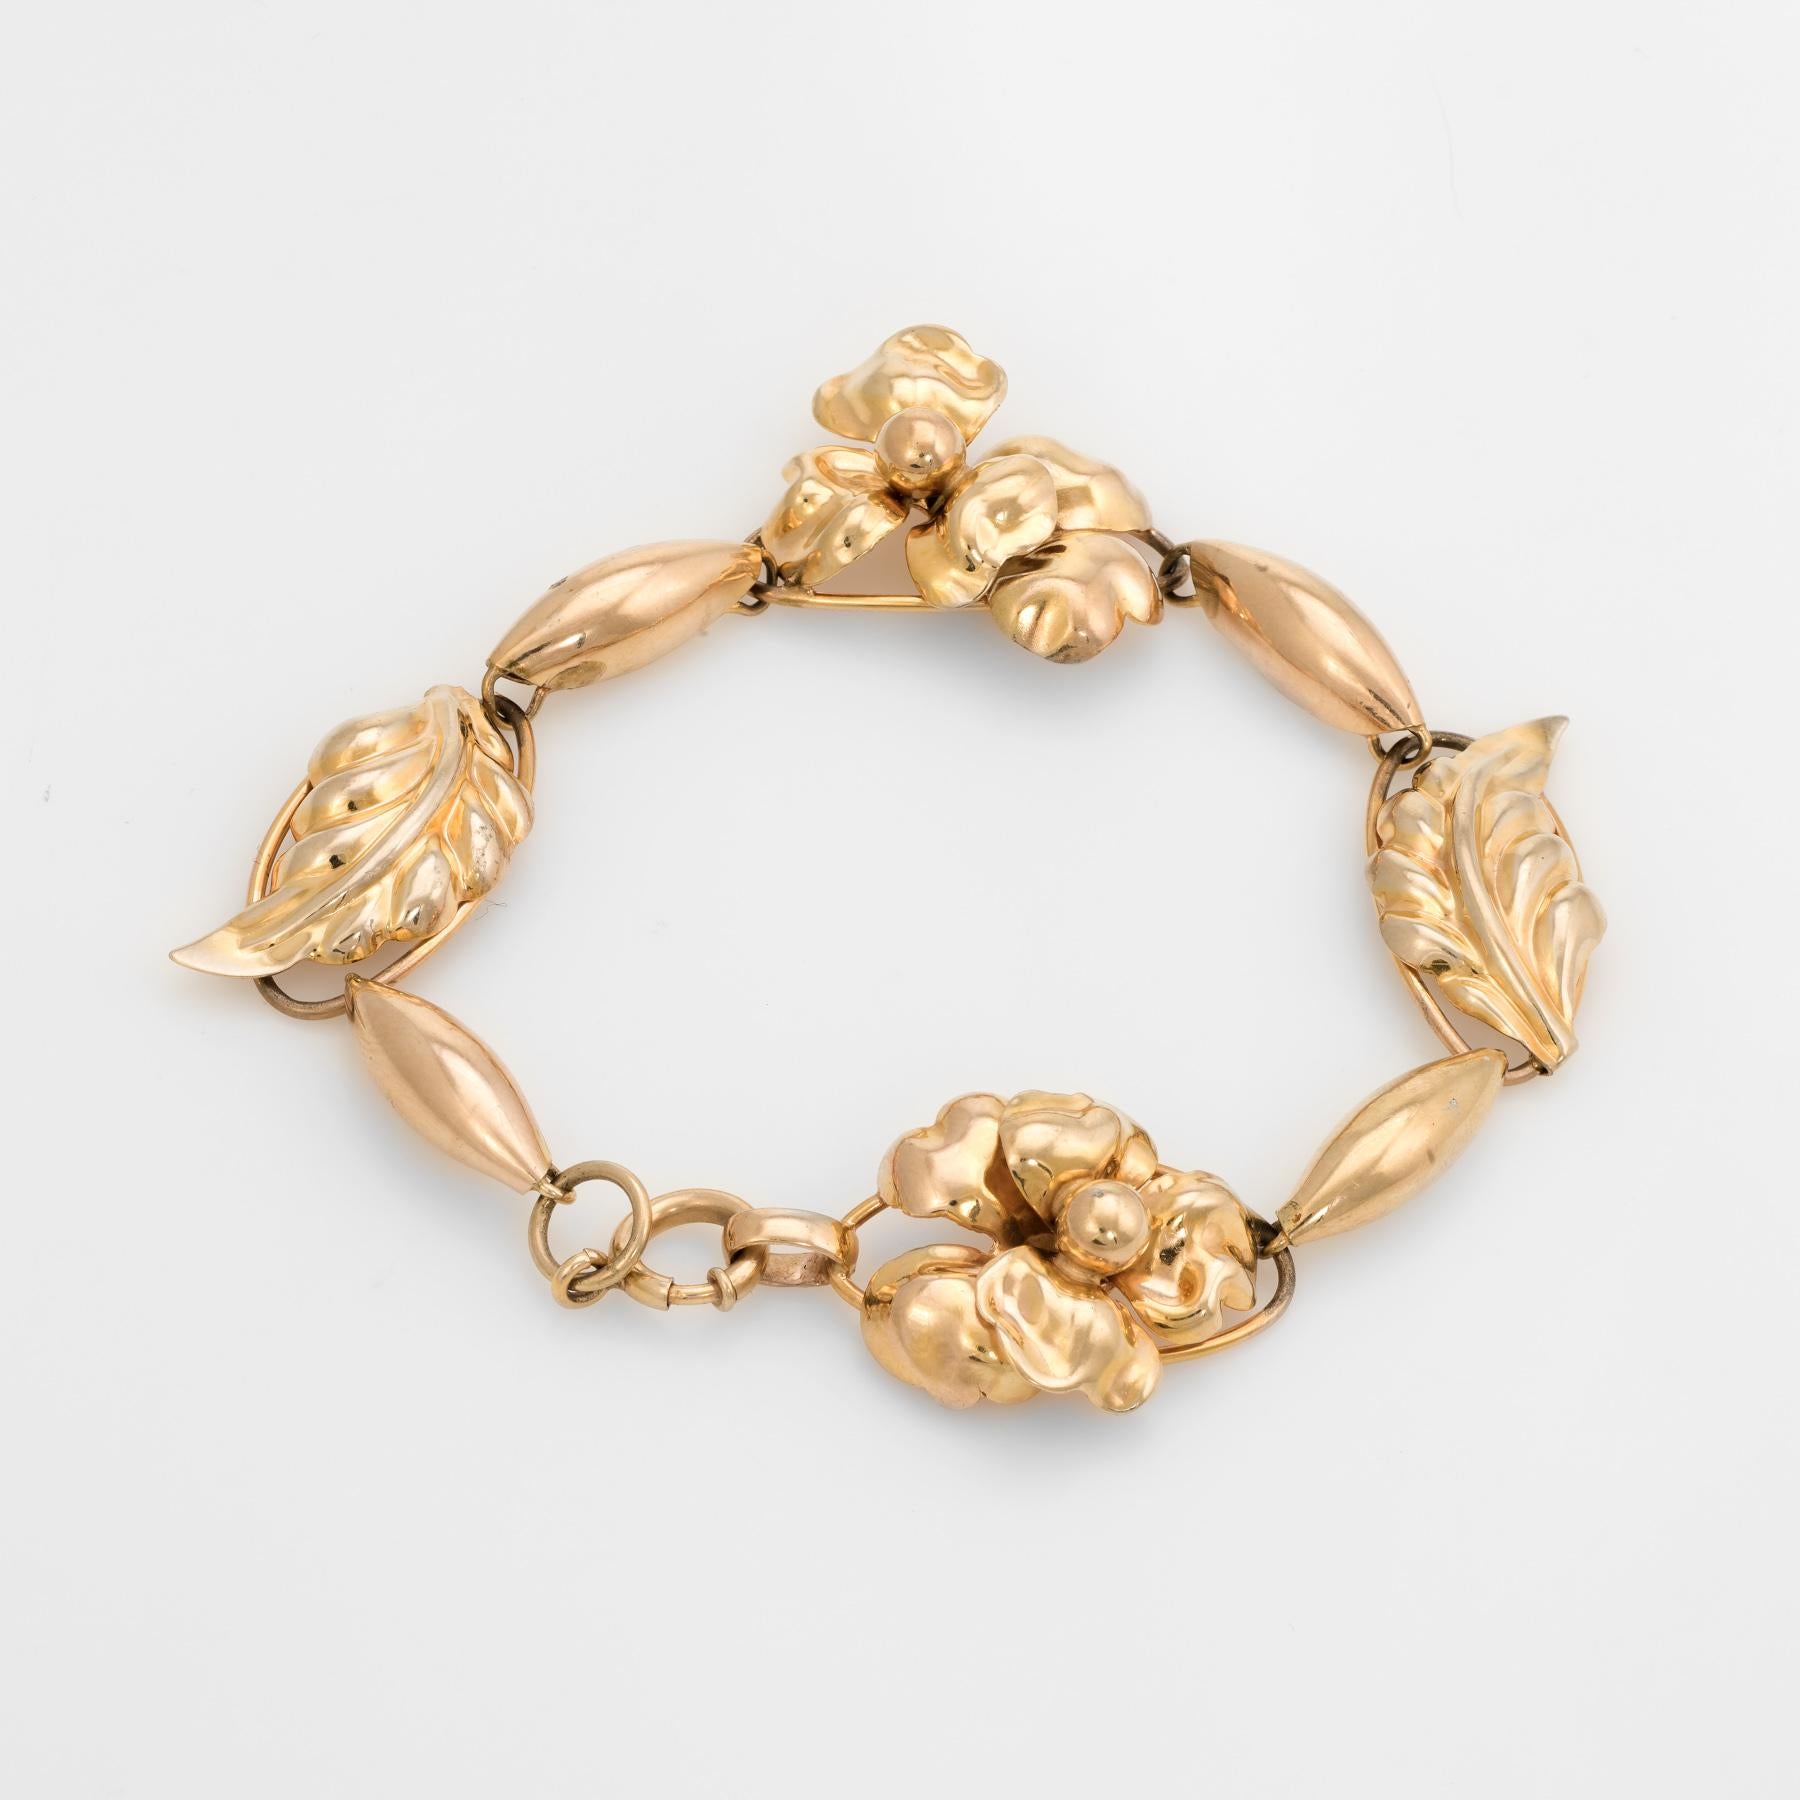 Elegant vintage bracelet (circa 1950s to 1960s), crafted in 10k yellow gold. 

The bracelet features an alternating flower and leaf pattern. Repousse is a metalworking technique in which a malleable metal is ornamented or shaped by hammering from